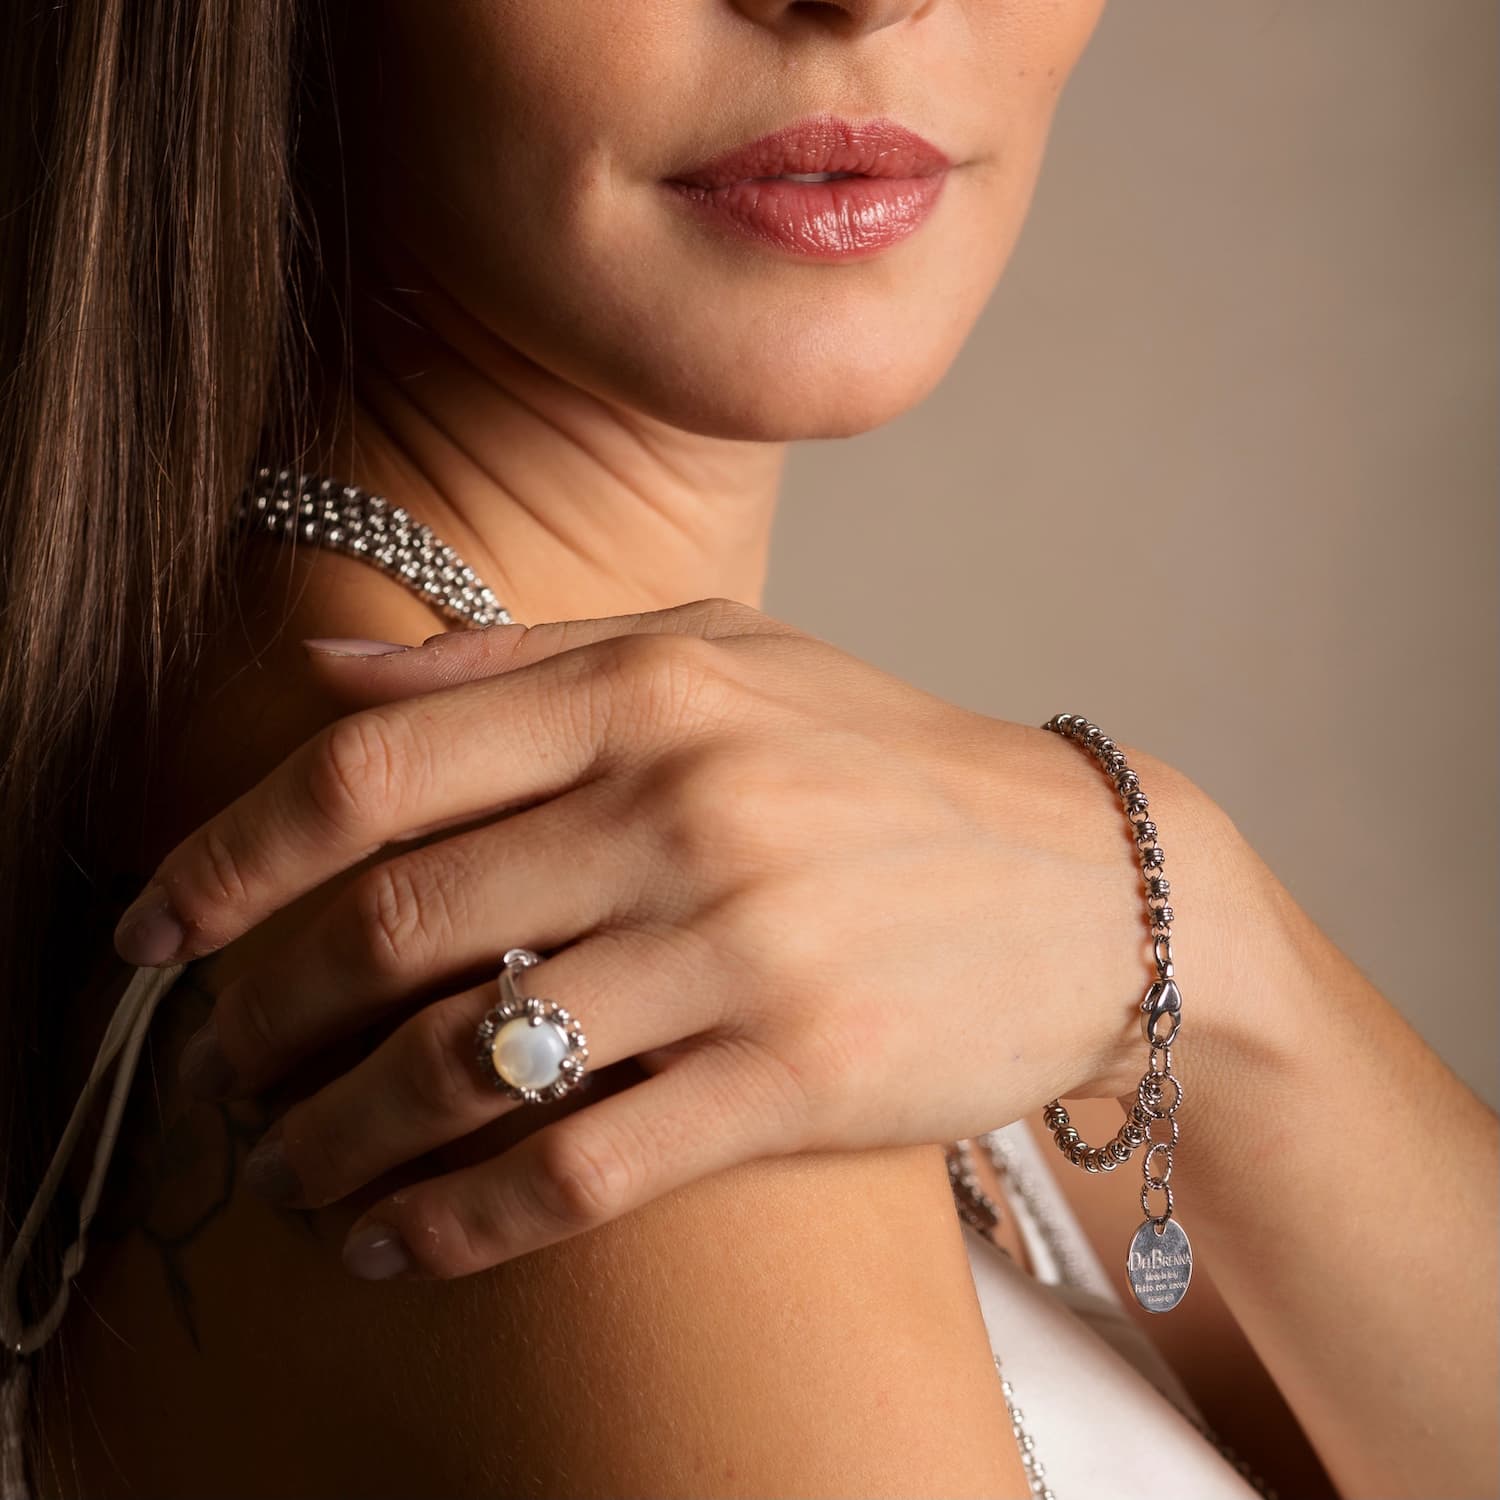 A close-up view of a model wearing a stunning silver bracelet in a silver chain design with a silver charm with the DelBrenna name - along with a matching silver chain necklace and a ring with the silver chain designed around a gemstone. All jewelry is hand-crafted by DelBrenna Italian Jewelry designers in Tuscany. 